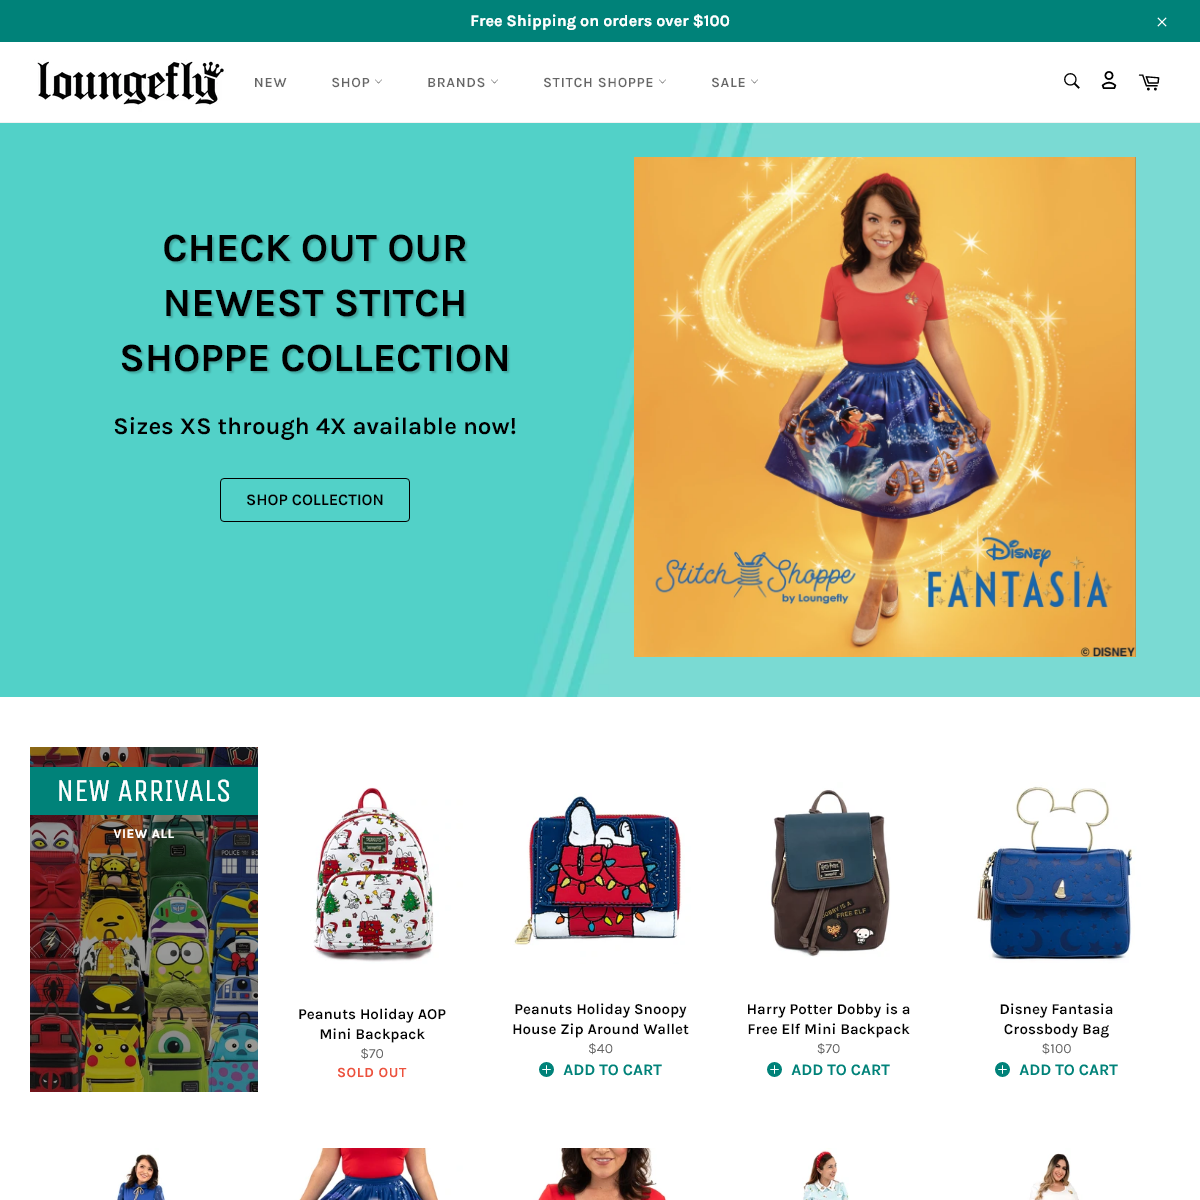 A complete backup of loungefly.com